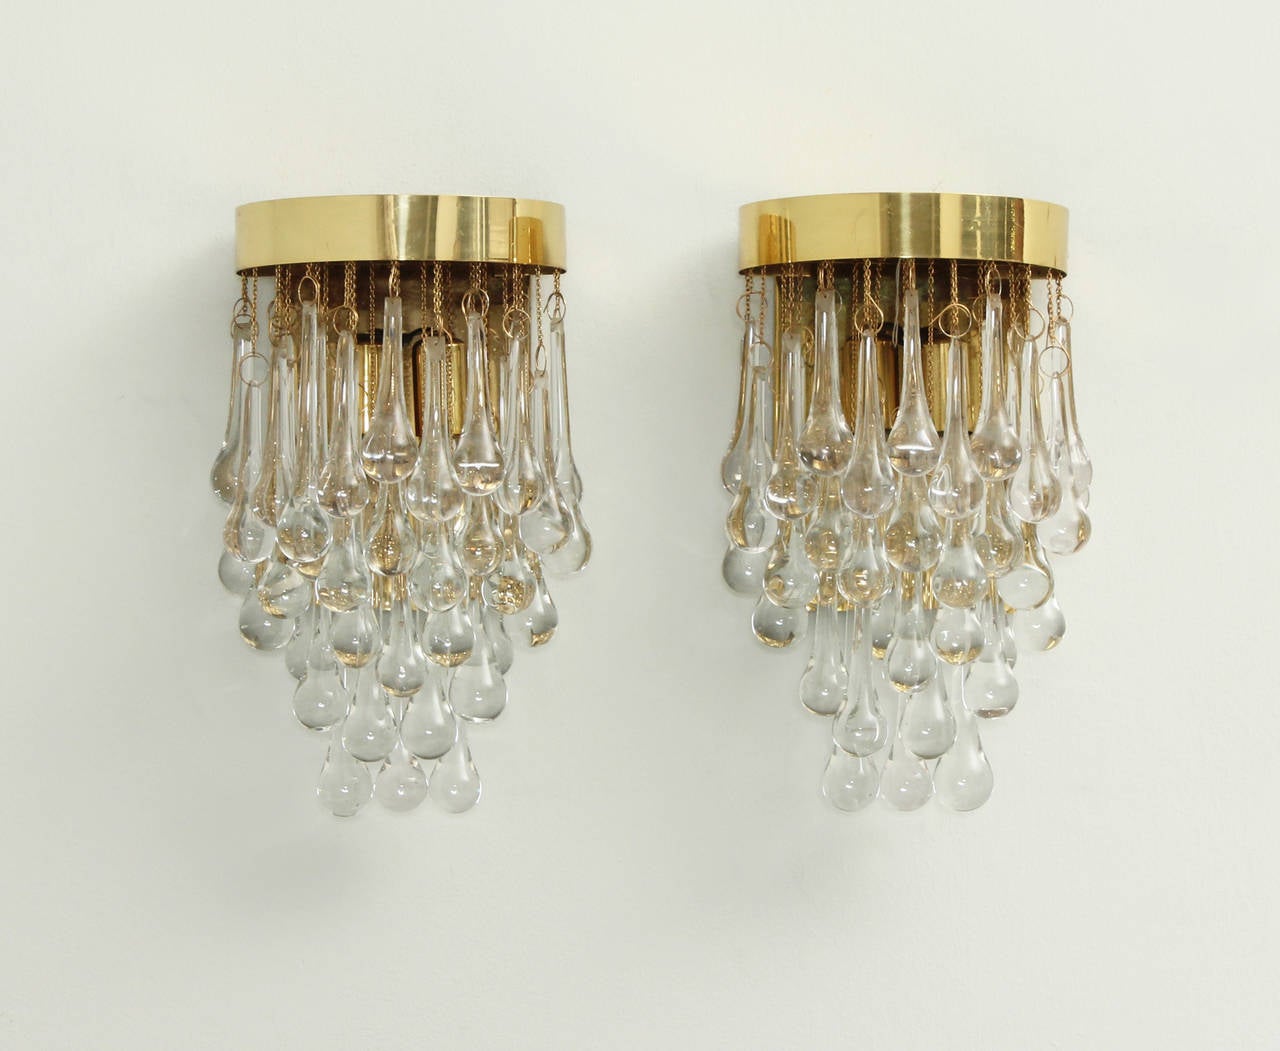 A pair of glass teardrop sconces from 1970's. Italy. Clear glass and brass.